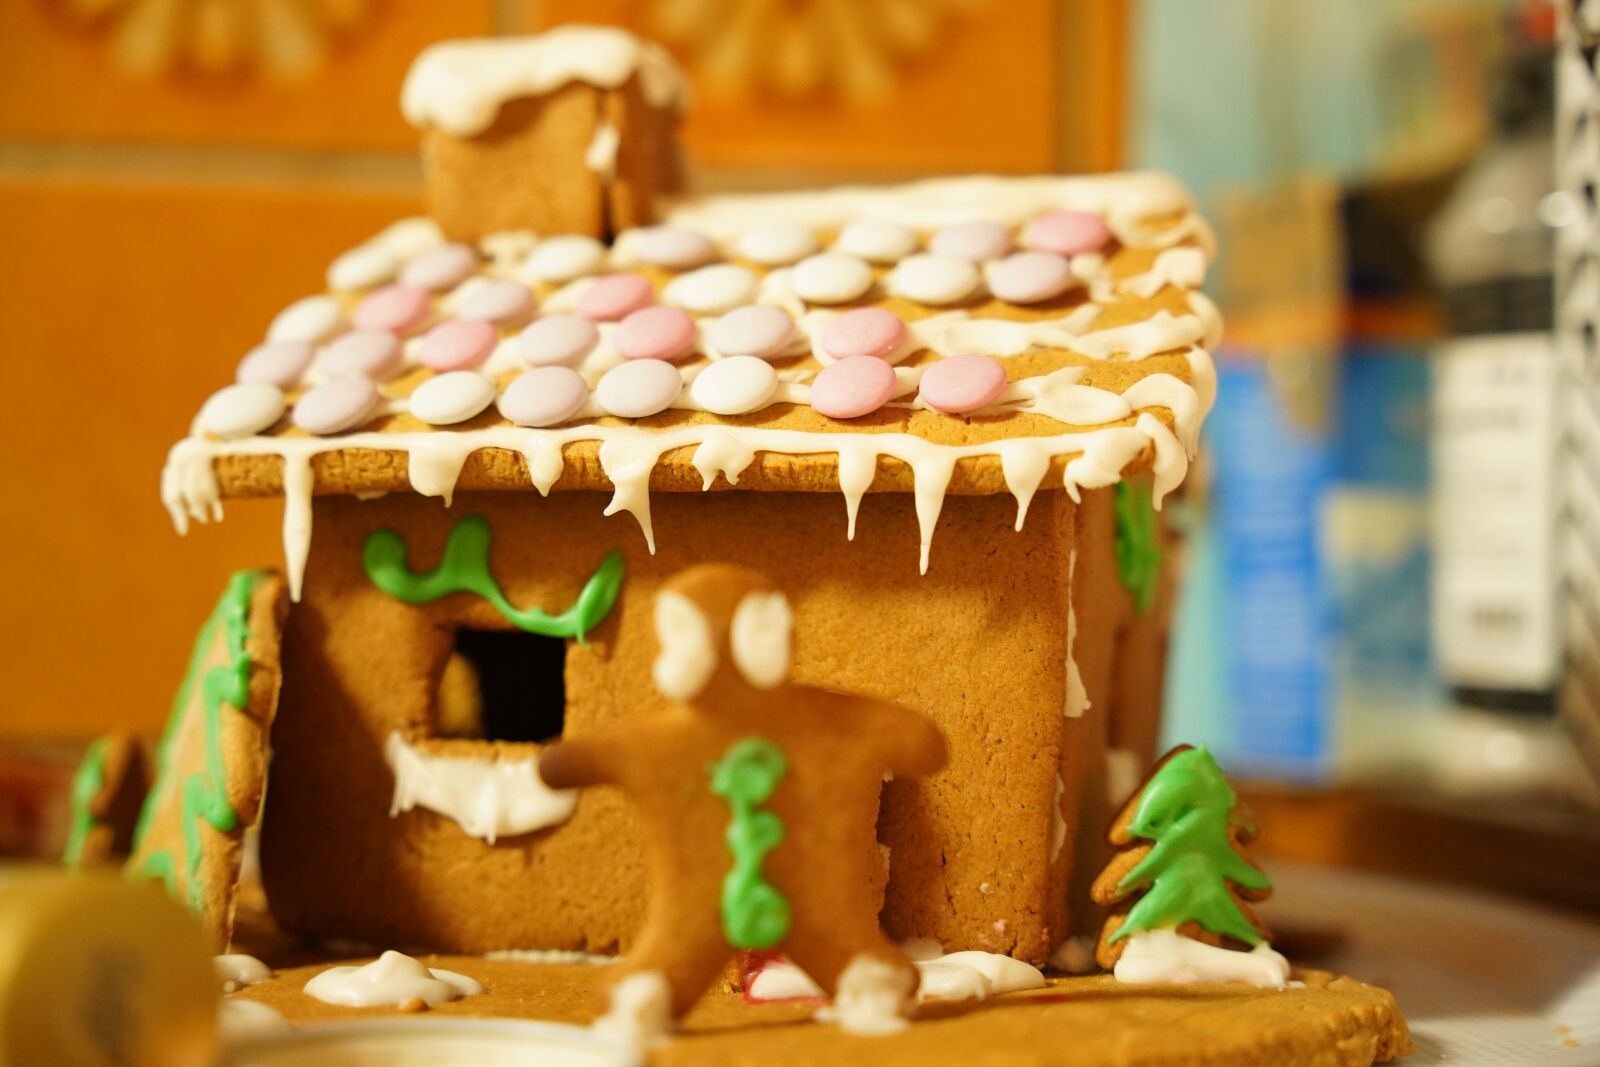 Sigma 24-70mm F2.8 DG DN Art sample photo. The gingerbread house photography